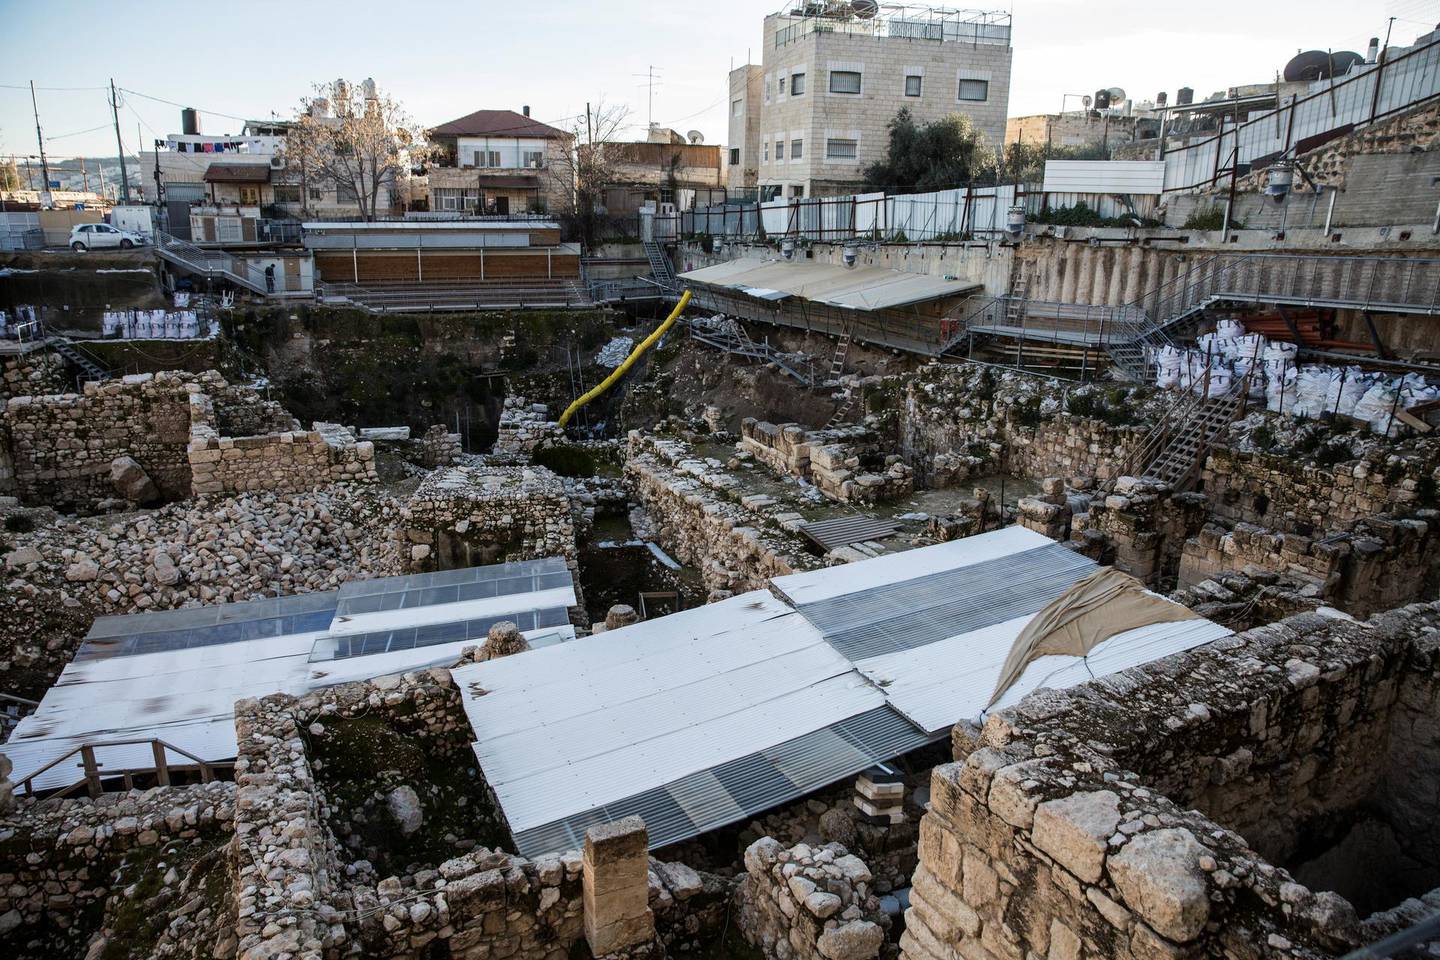 An Israeli archeological dig in the Wadi Hilweh in Silwan, a contested neighborhood right beyond the Old CityÕs walls of Jerusalem where Jewish settlers have moved into the area .

Israeli archeologists, backed by a right-wing nationalist Jewish organization, are digging a tunnel that they say traces a road Jewish worshippers used 2,000 years ago and now is set to be part of a larger tourist and religious attraction. 
(Photo by Heidi Levine for The National).